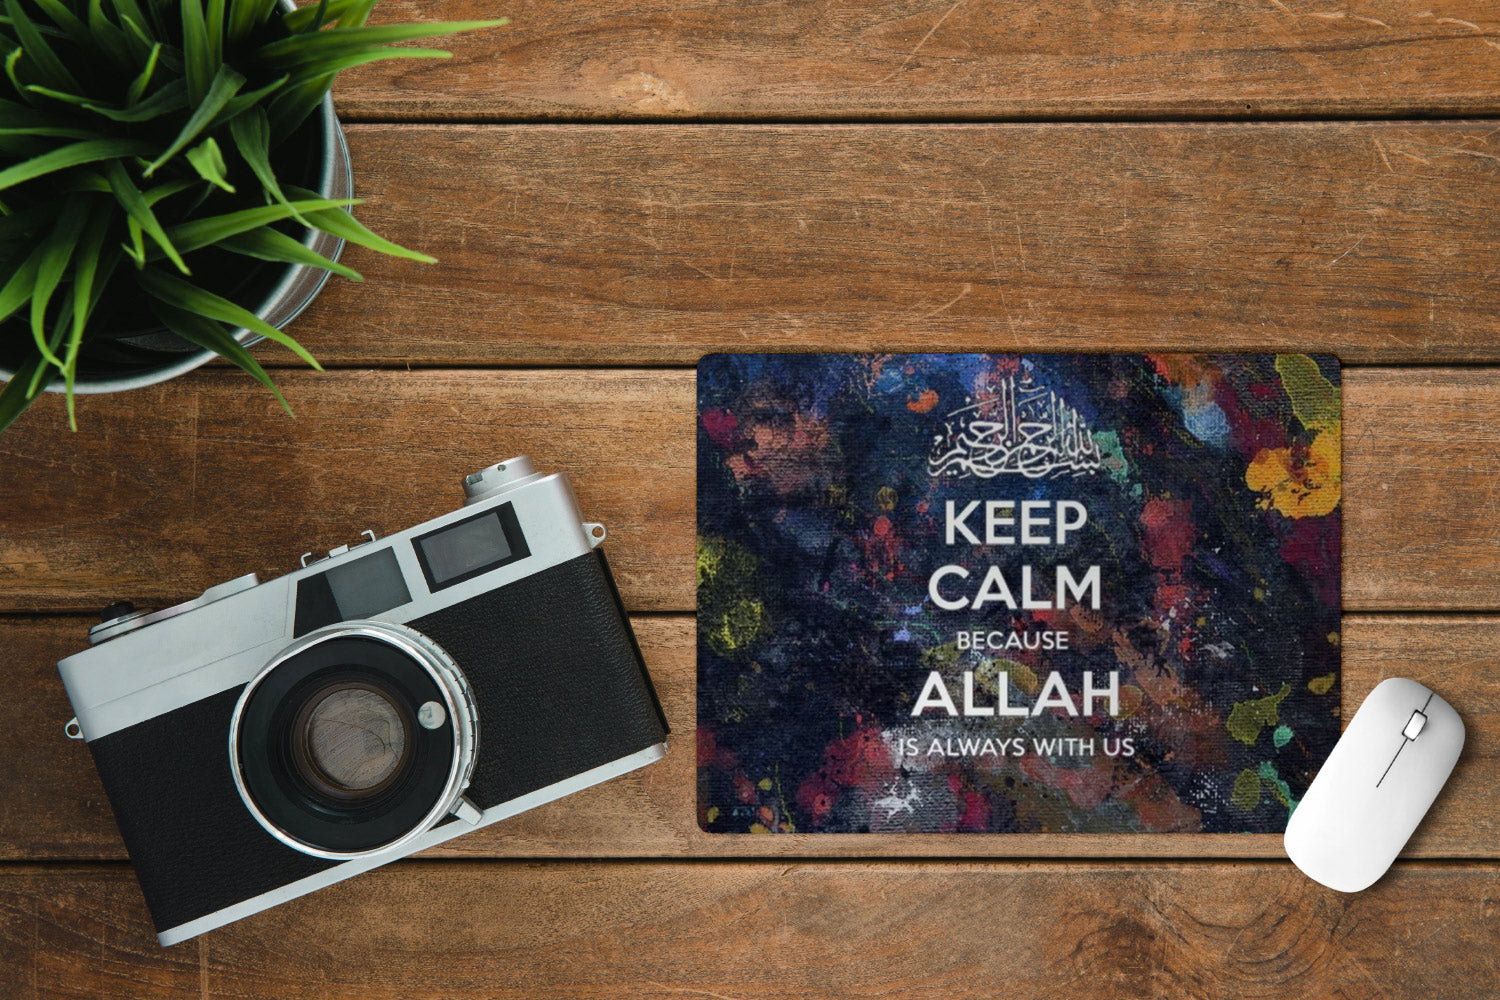 Keep Calm Because Allah Is Always With Us ' Printed Non-Slip Rubber Base Mouse Pad for Laptop, PC, Computer.